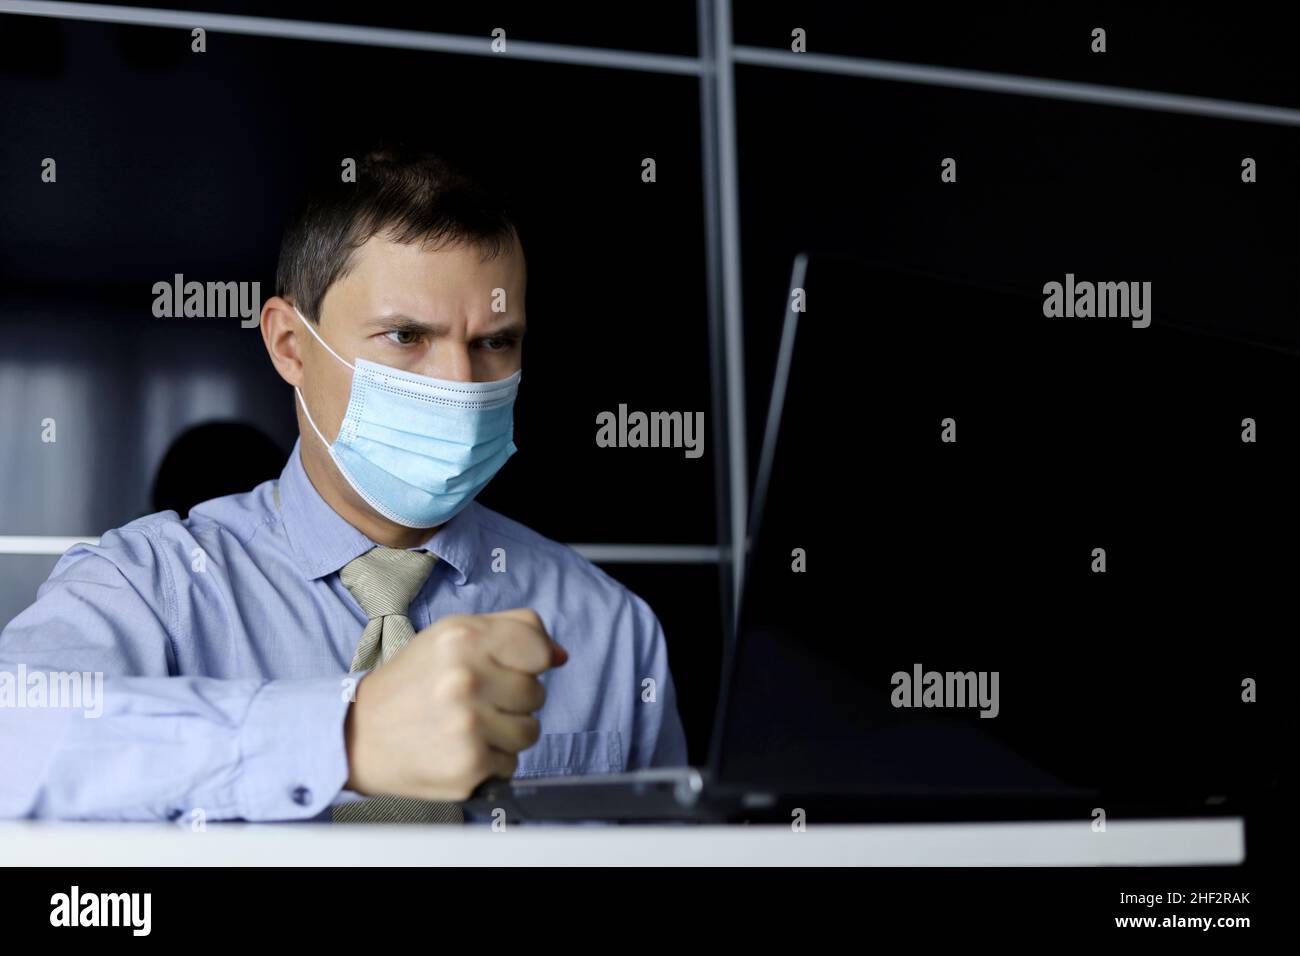 Angry man in face mask and office clothes banging his fist on the table while sitting at laptop. Concept of disgruntled boss during online meeting Stock Photo